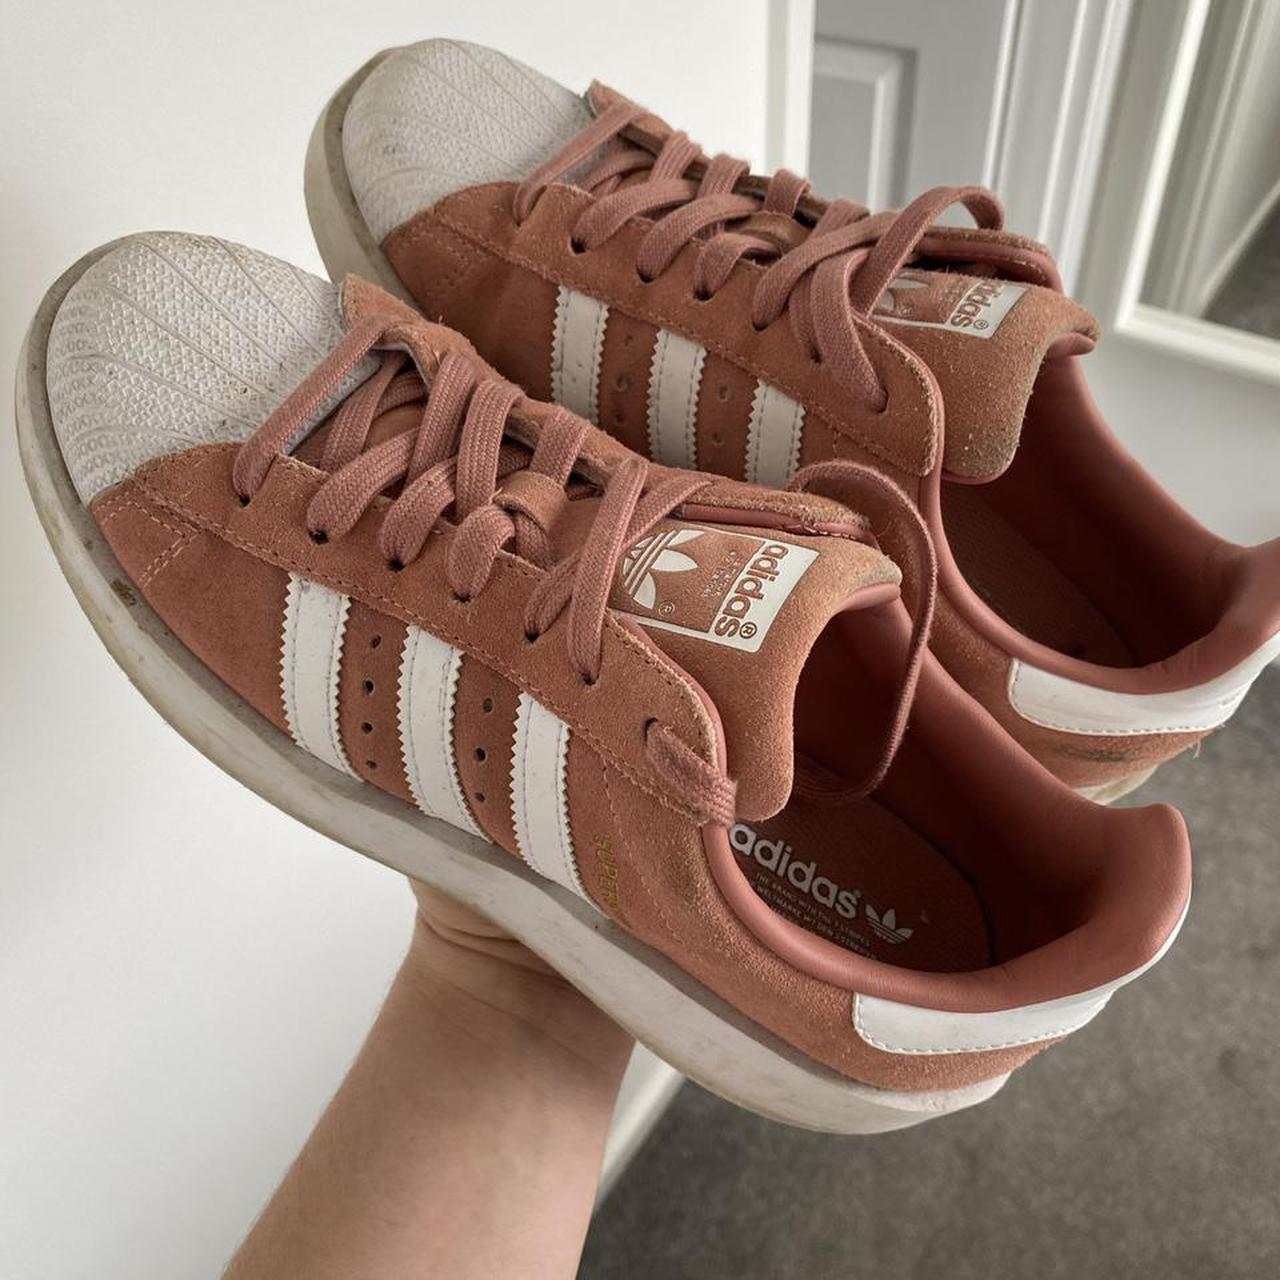 Adidas Women's Pink and White | Depop